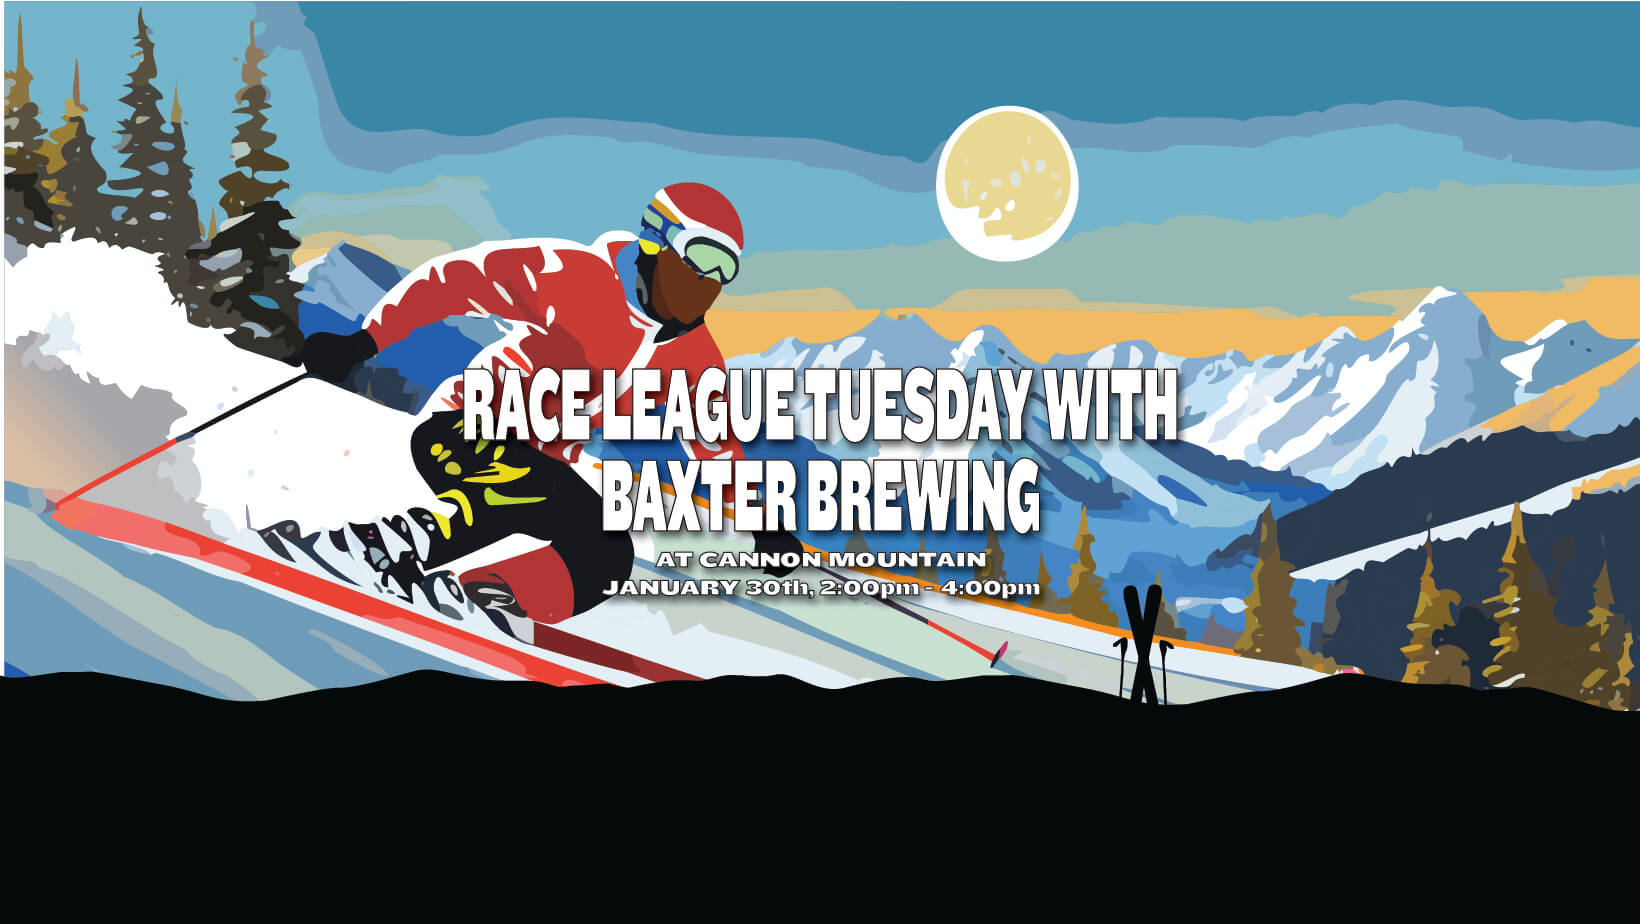 image promoting a race league tasting event at Cannon Mountain